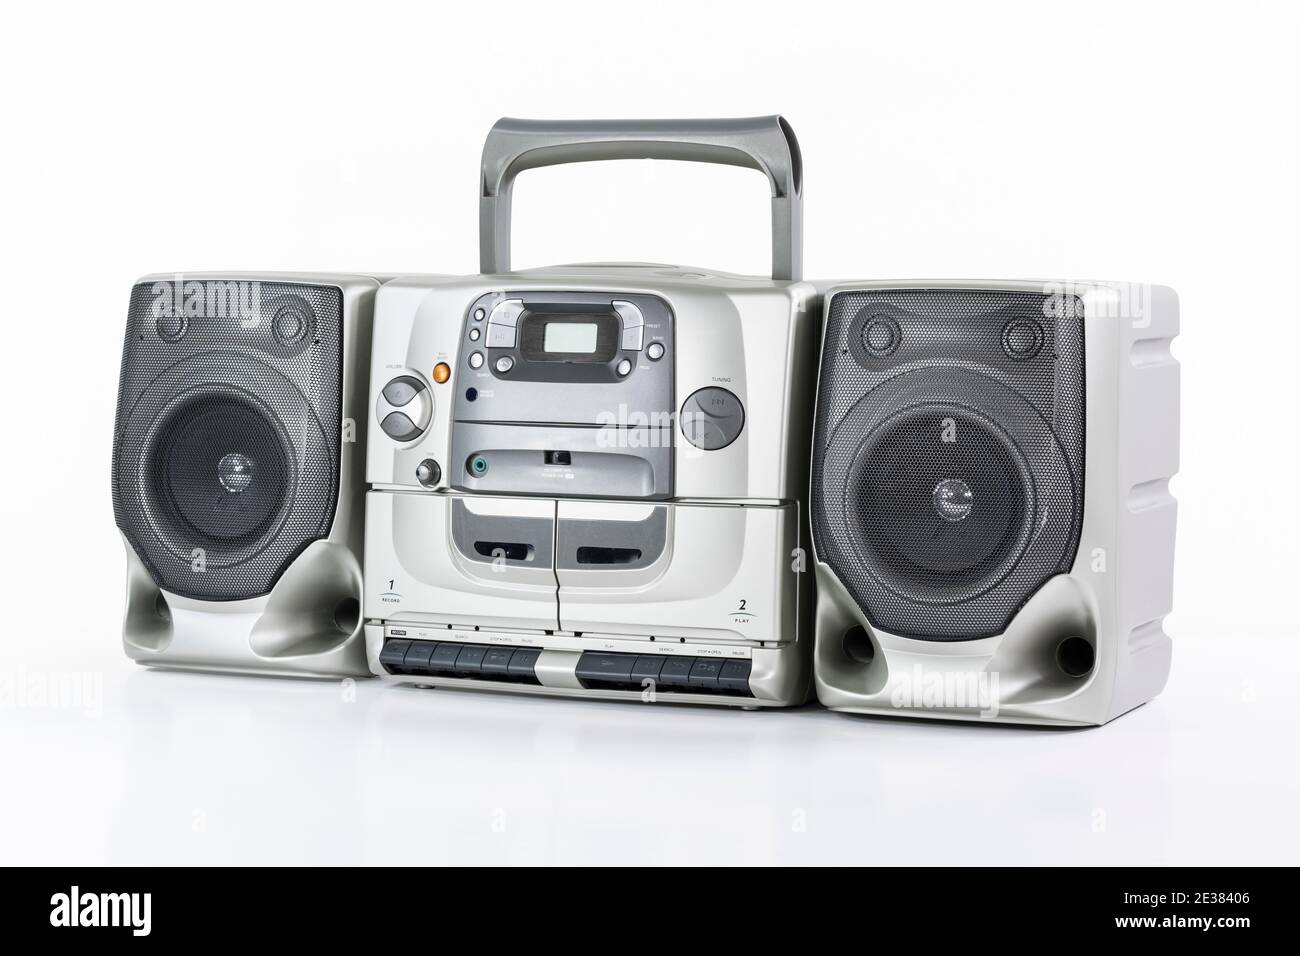 Vintage boom box style portable stereo radio, cd, cassette tape recorder on  white Stock Photo - Alamy